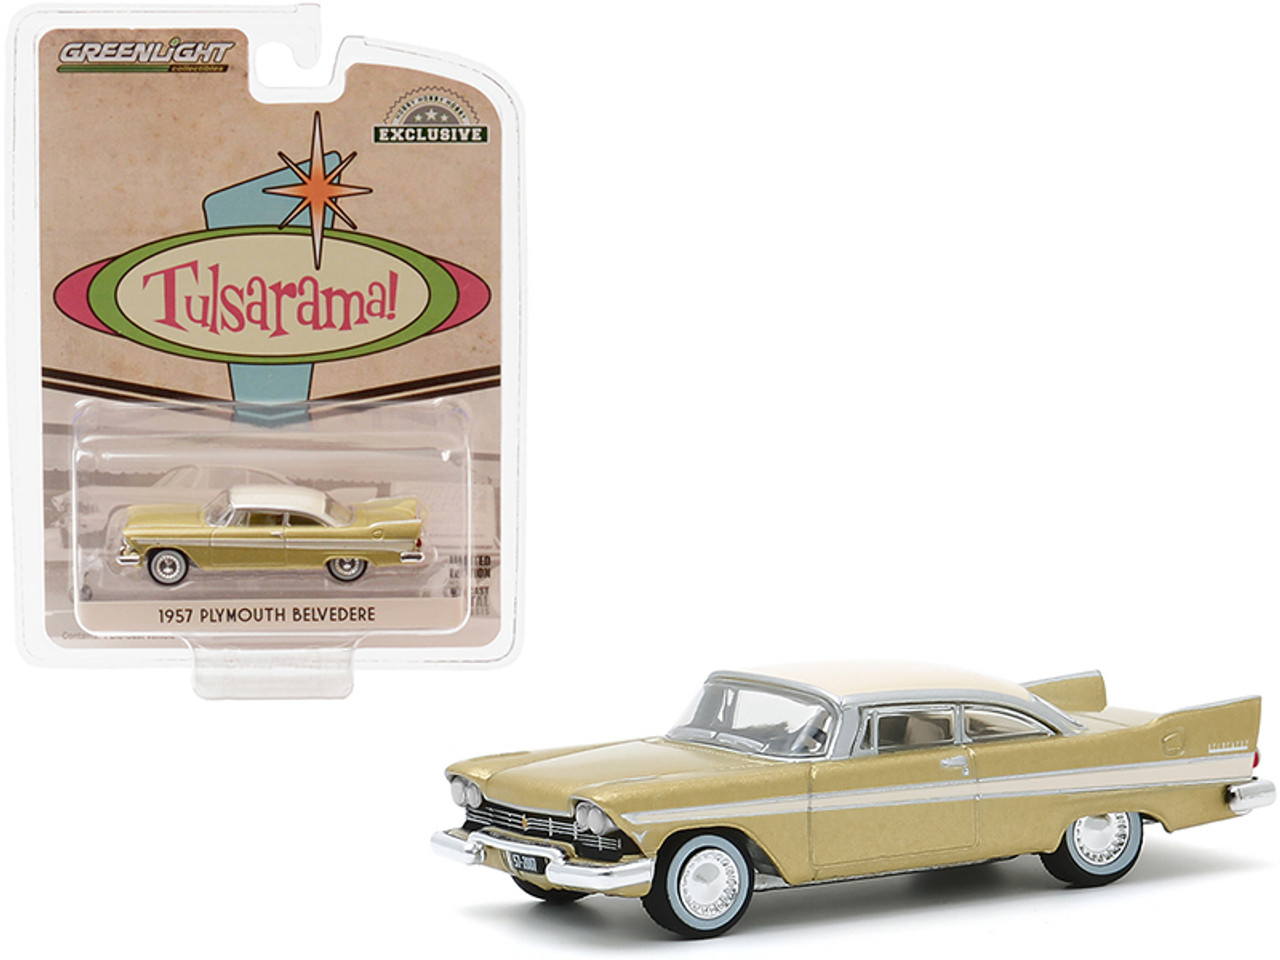 1957 Plymouth Belvedere Desert Gold with Sand Dune White Top Tulsa (Oklahoma) "Tulsarama" Underground Vault (1957) "Hobby Exclusive" 1/64 Diecast Model Car by Greenlight